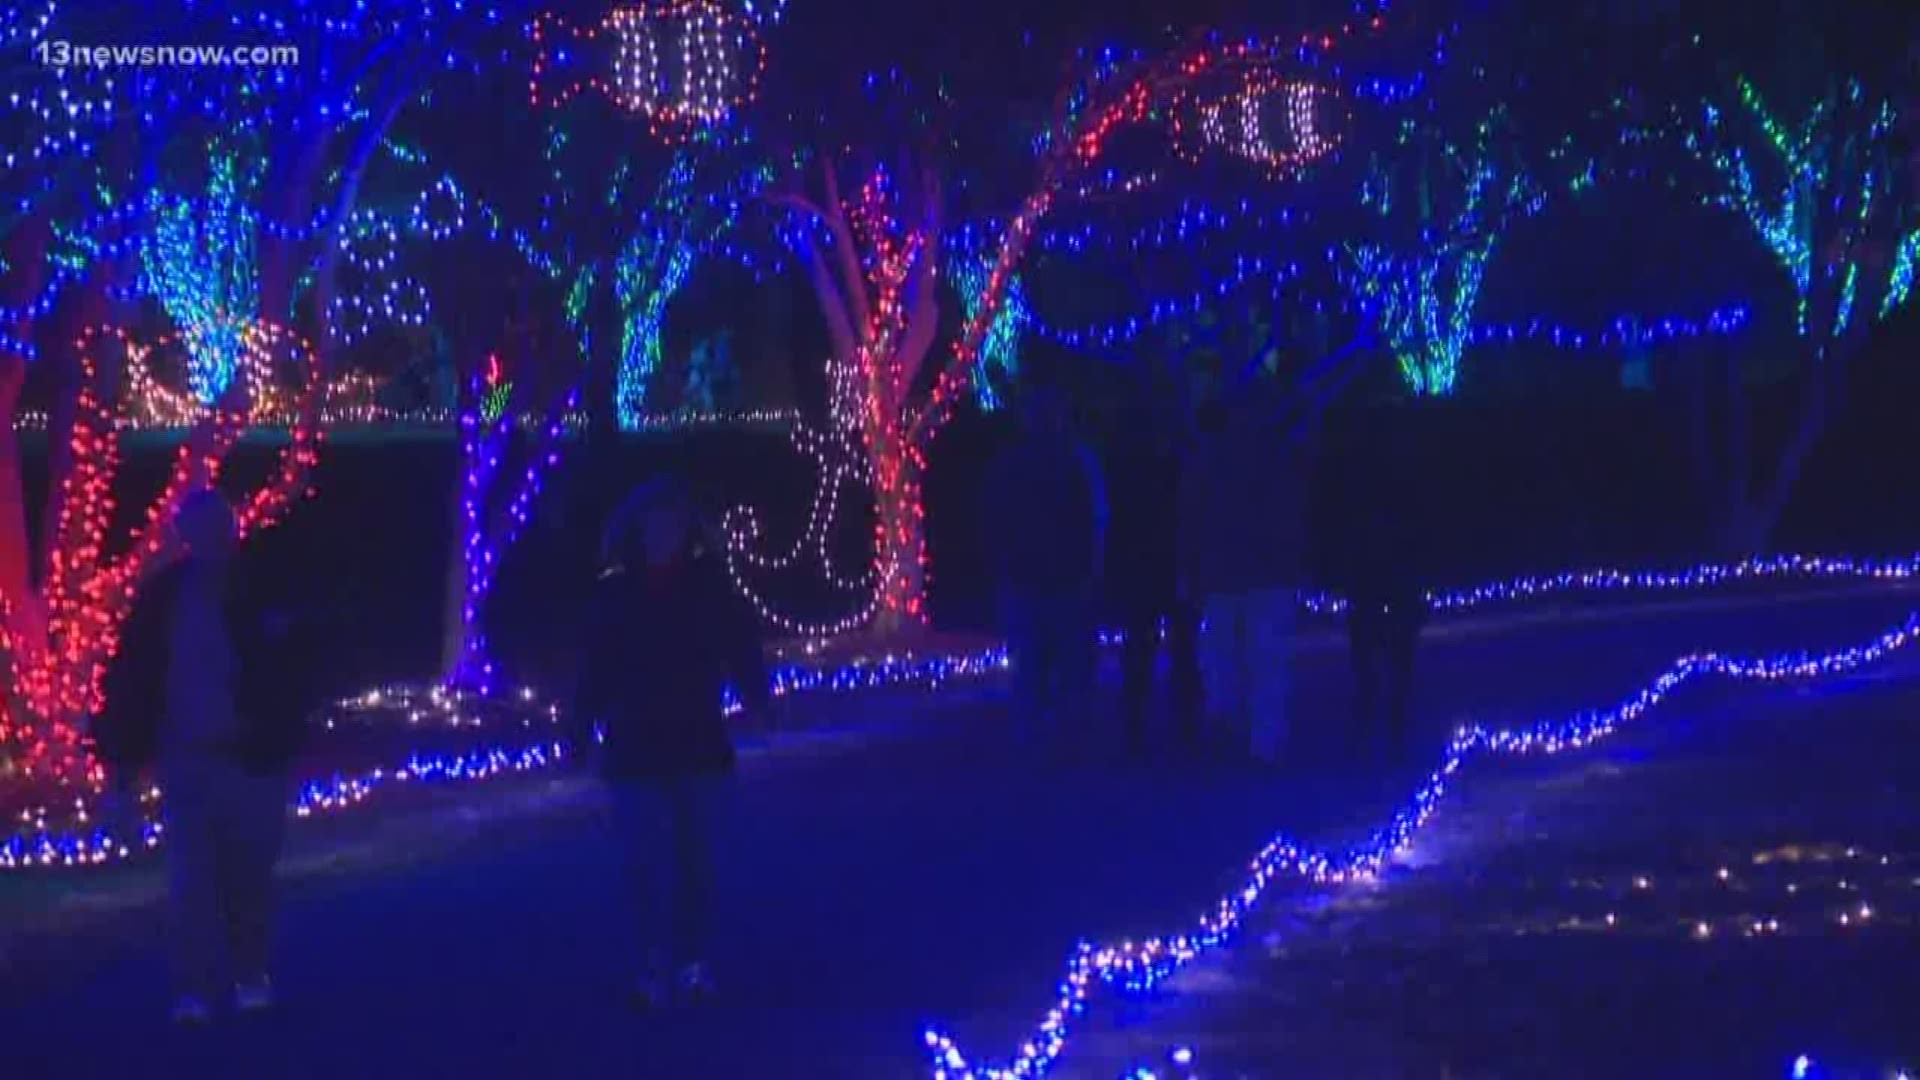 The Norfolk Botanical Garden's Million Bulb Walk is open through December 14. You can drive through the Garden of Lights, which has been offered for years.